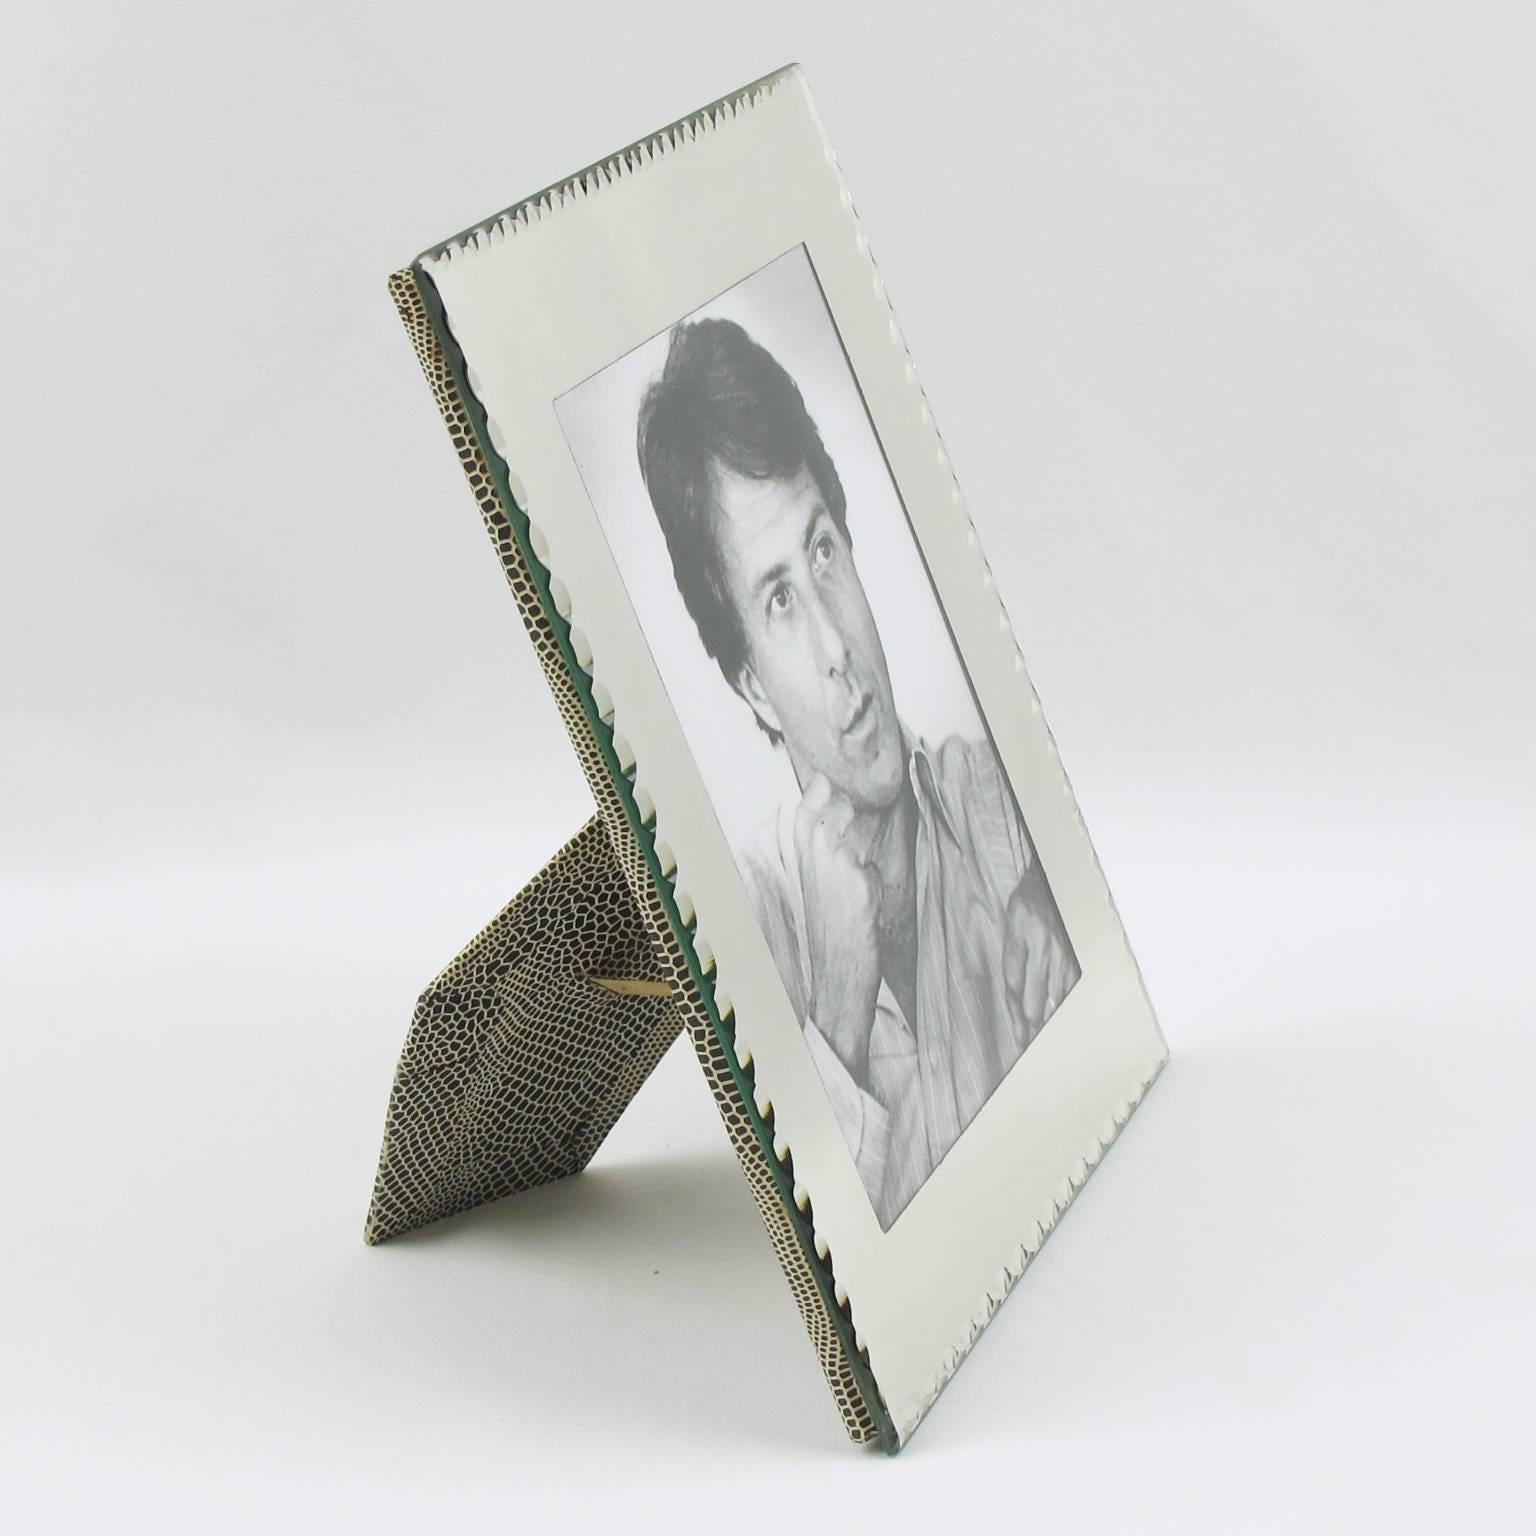 Lovely mirrored picture photo frame with garland beveling all around. France, circa 1940s. Frame can be placed either in portrait or in landscape position. Back in black and white textured pattern paper and easel. Excellent vintage